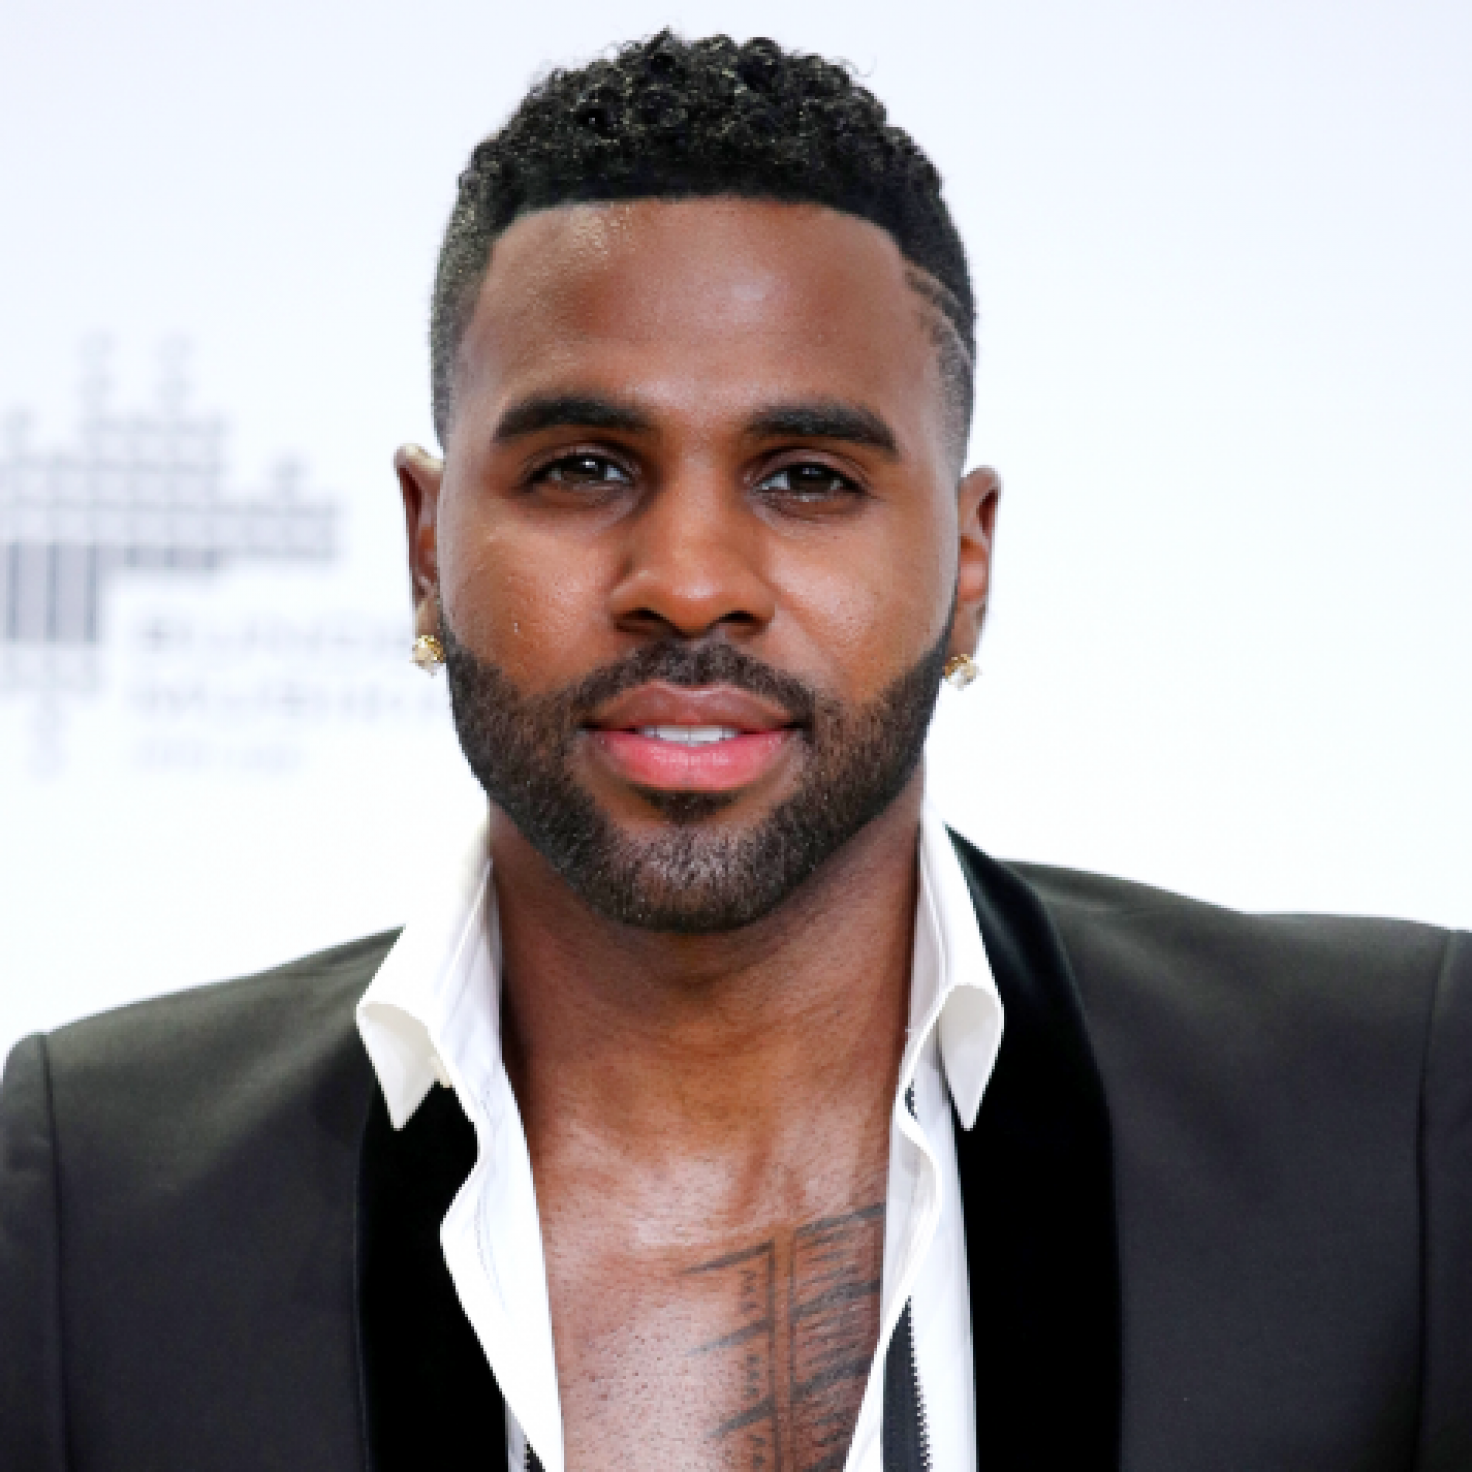 Jason Derulo Shaved Off His Eyebrow And It Was Painful To Watch